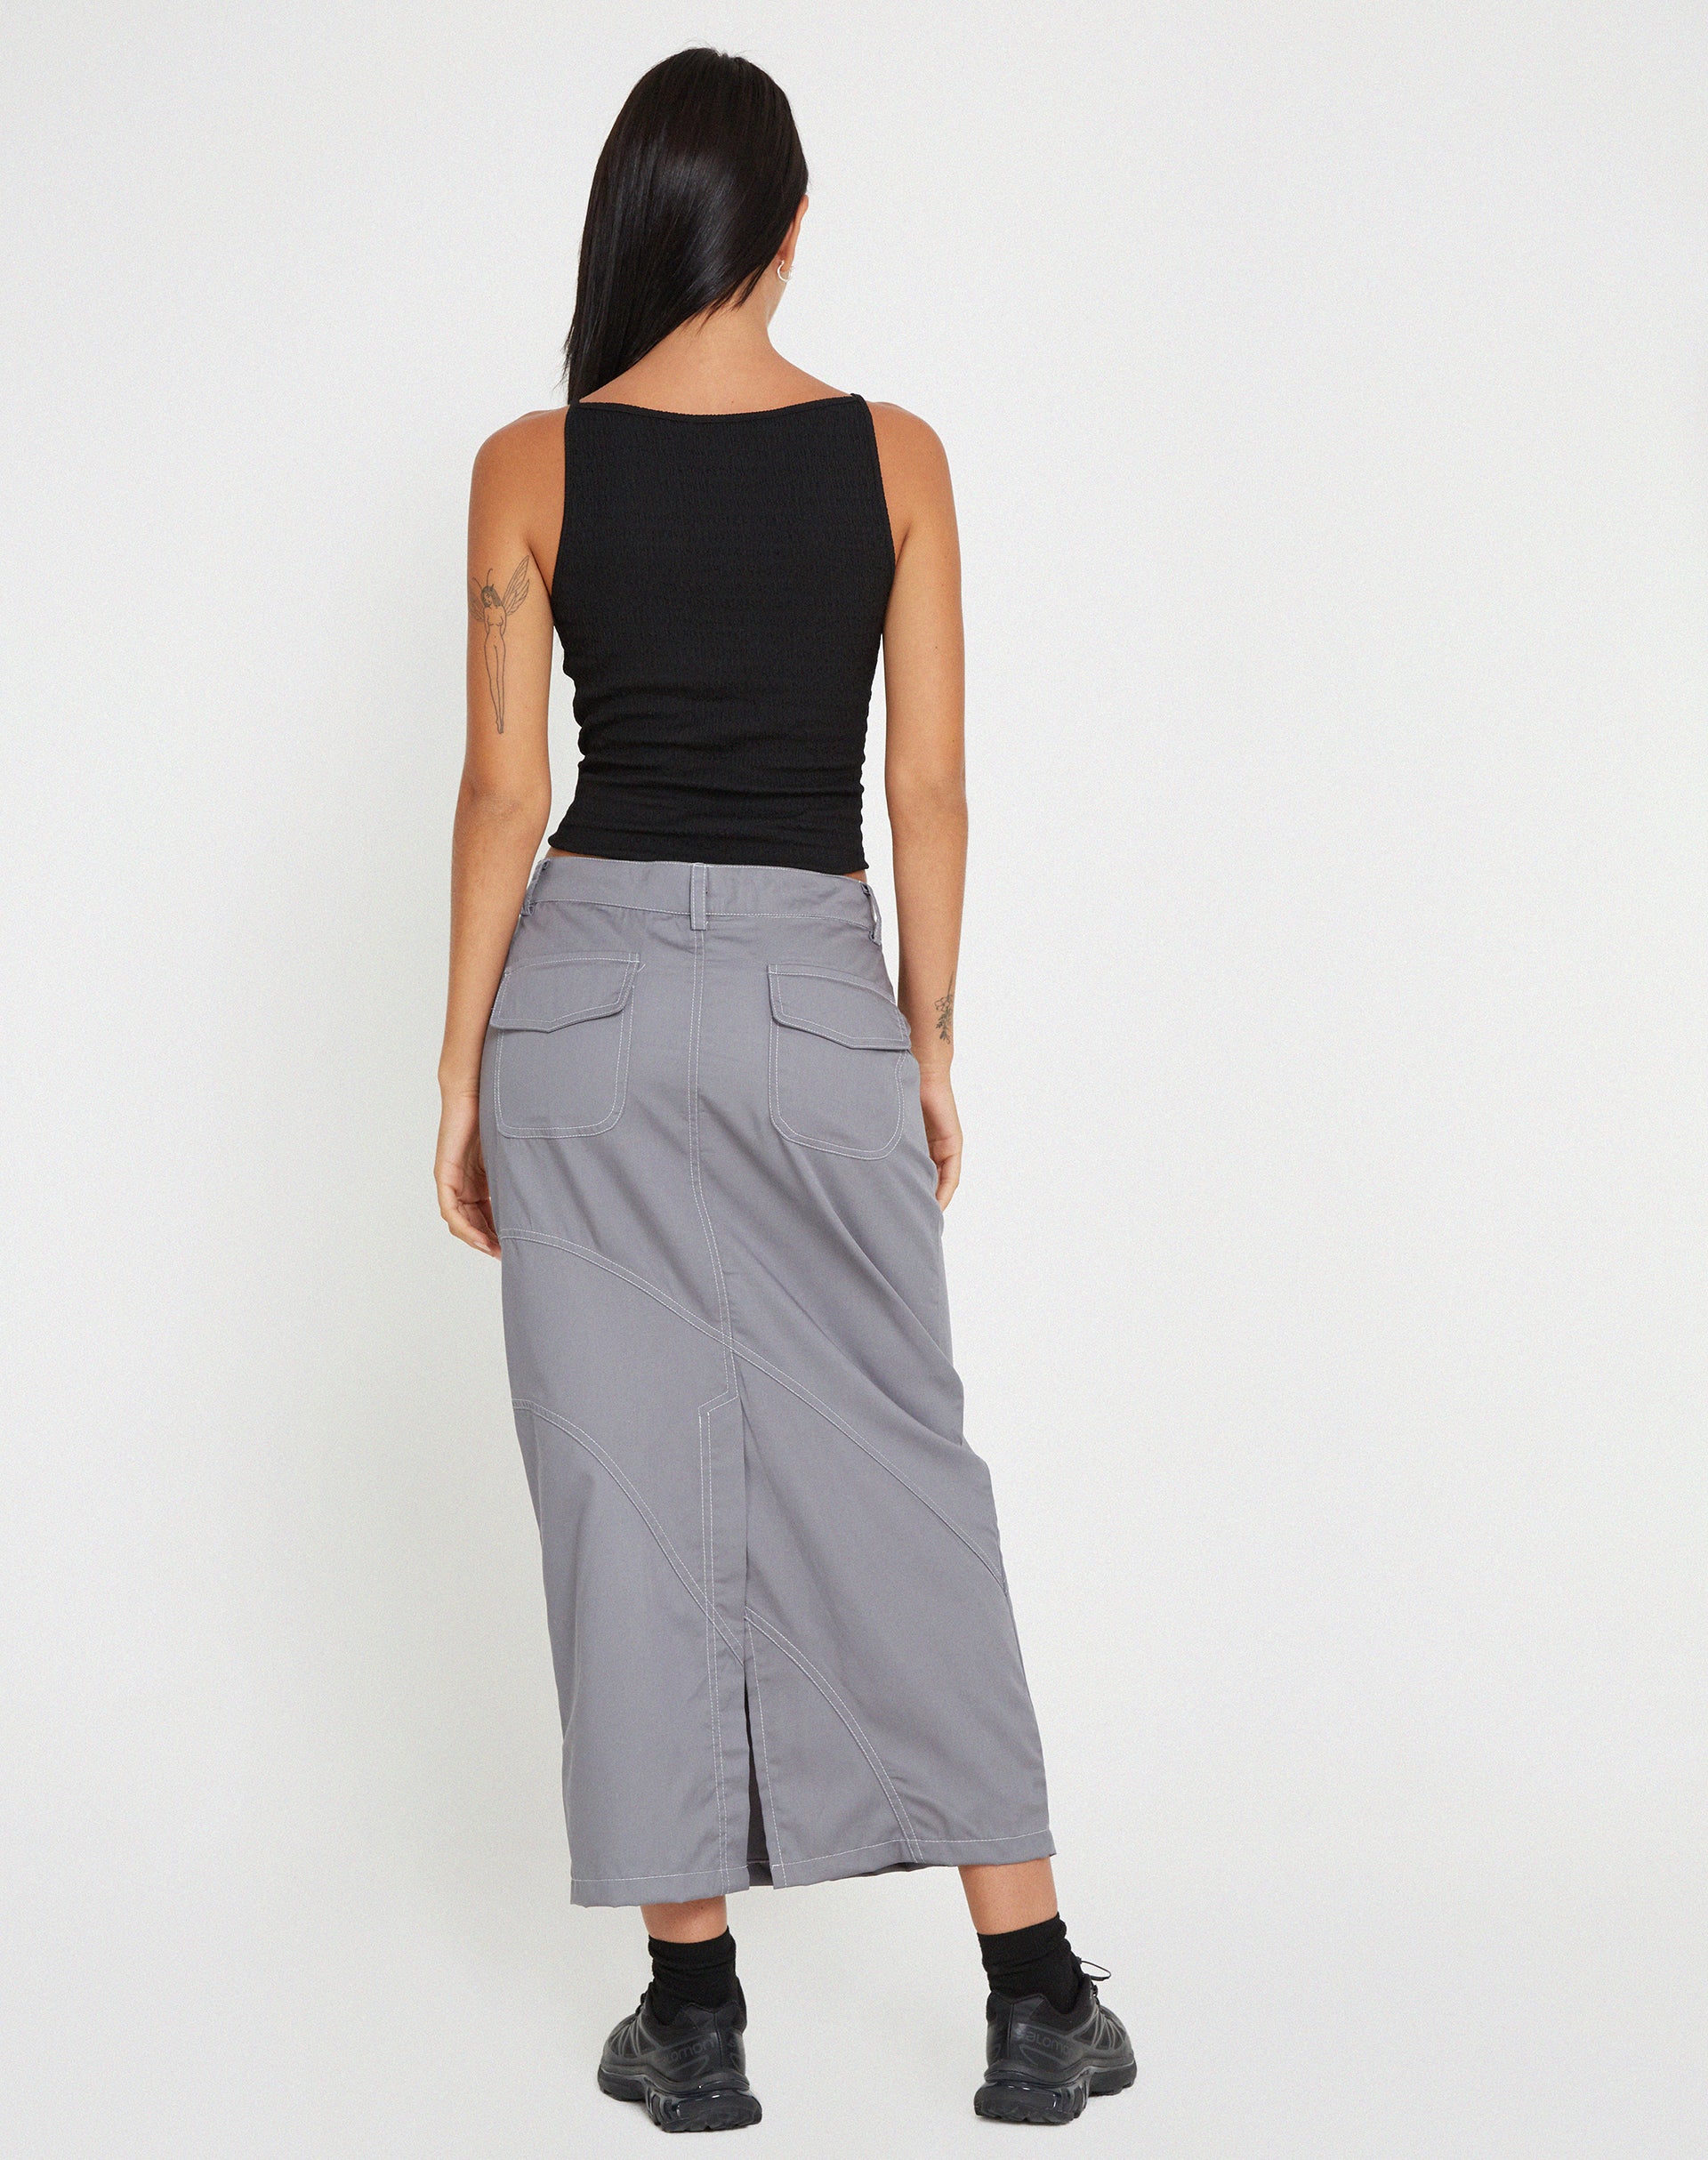 image of Reese Cargo Midi Skirt in Charcoal Grey with White Stitch